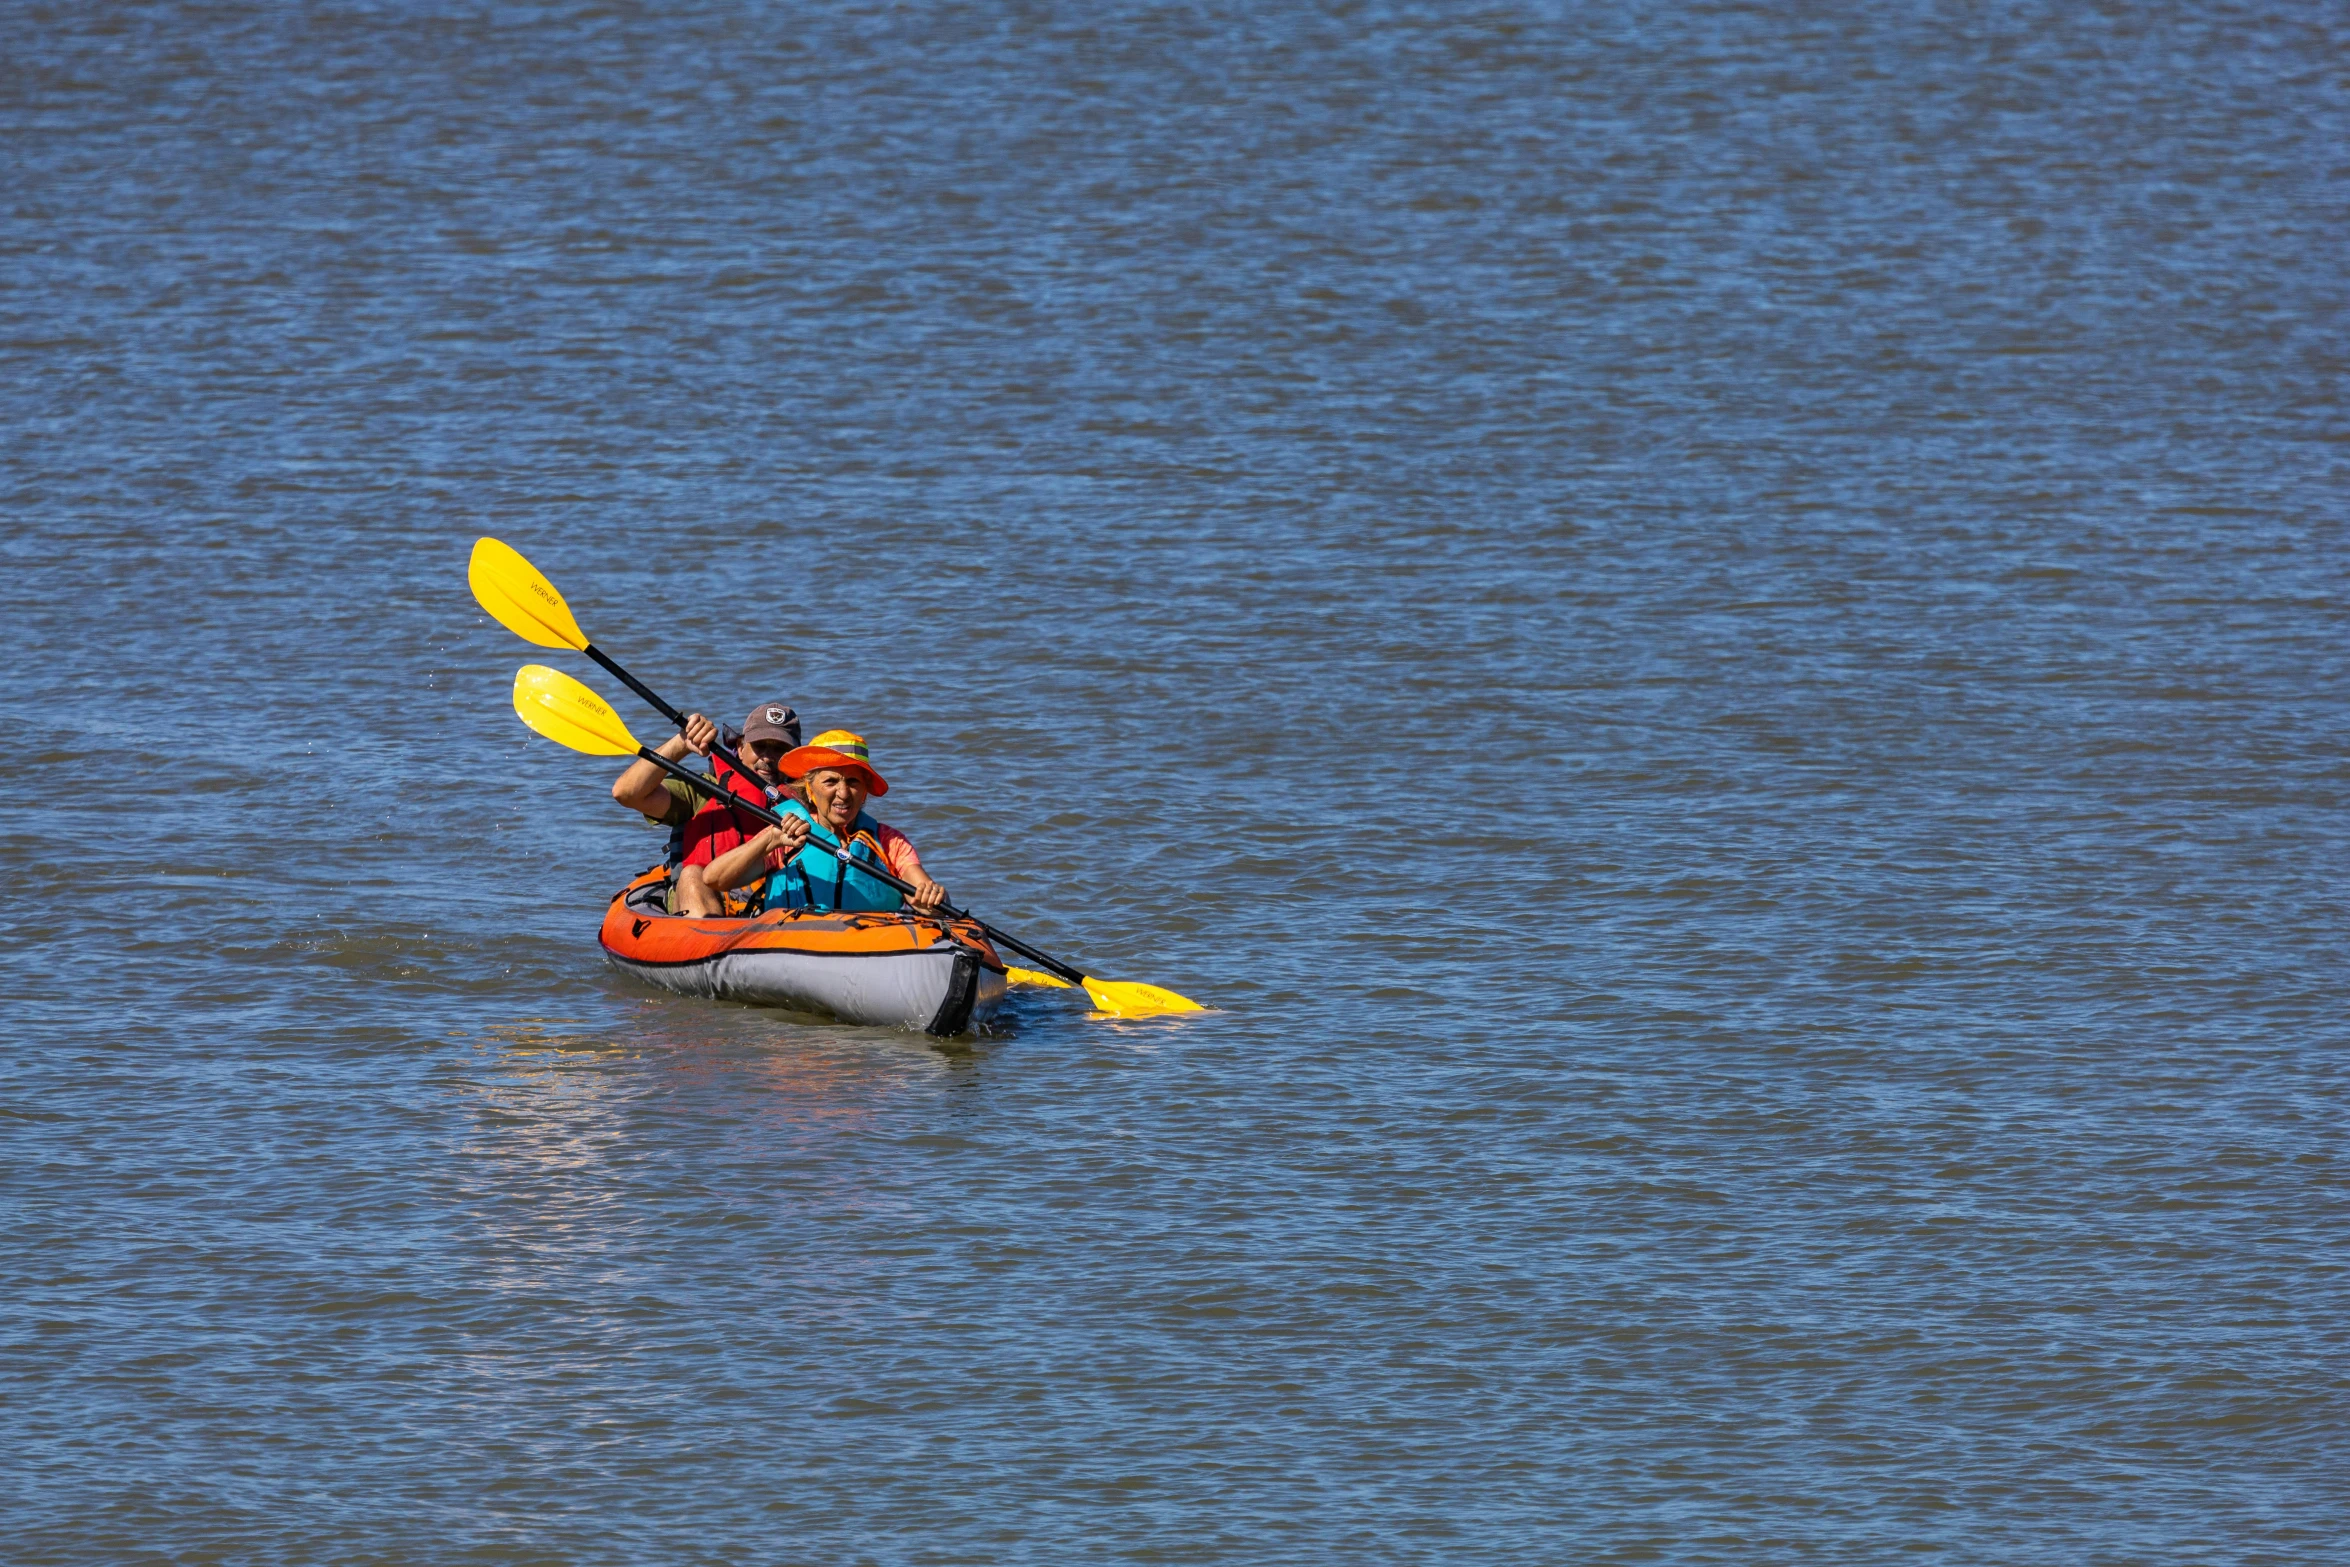 three people are paddling on kayaks in the middle of the ocean